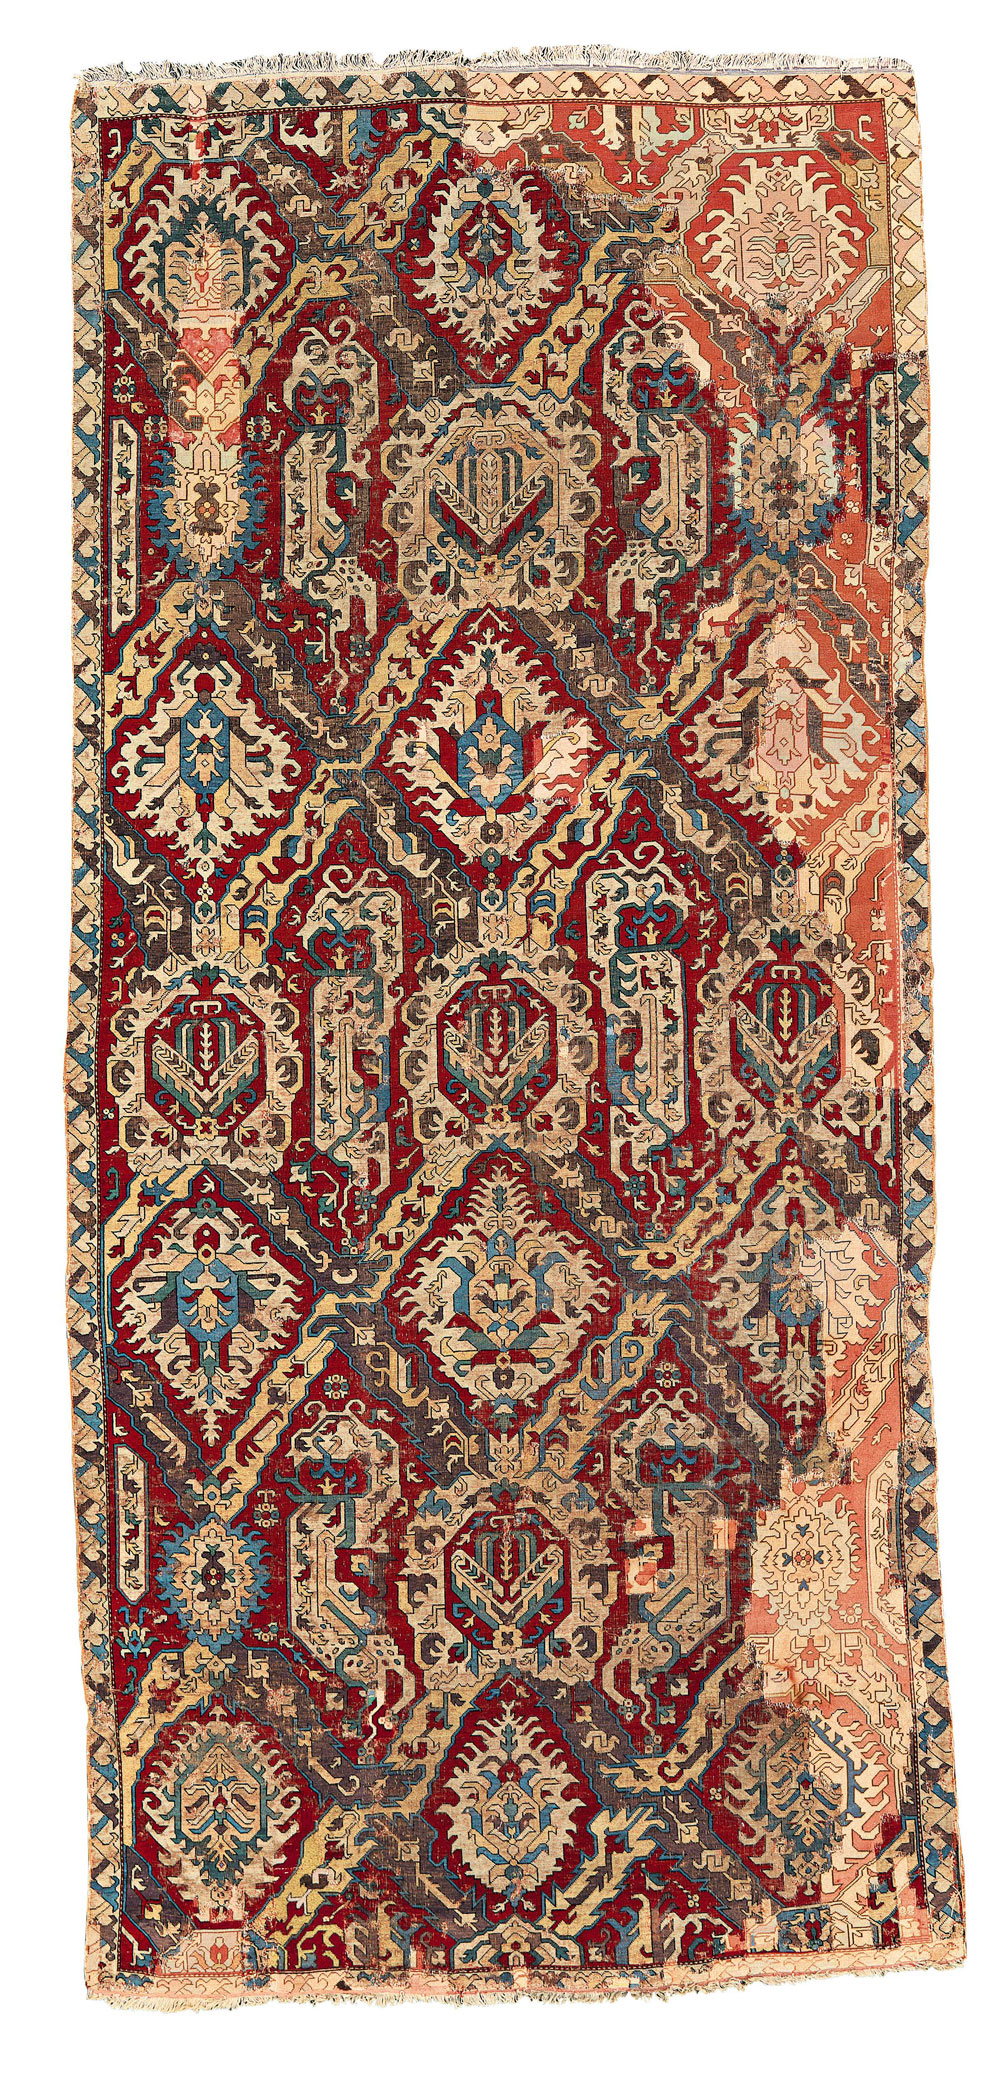 Near record price achieved for Caucasian Dragon Carpet at Sotheby's - HALI